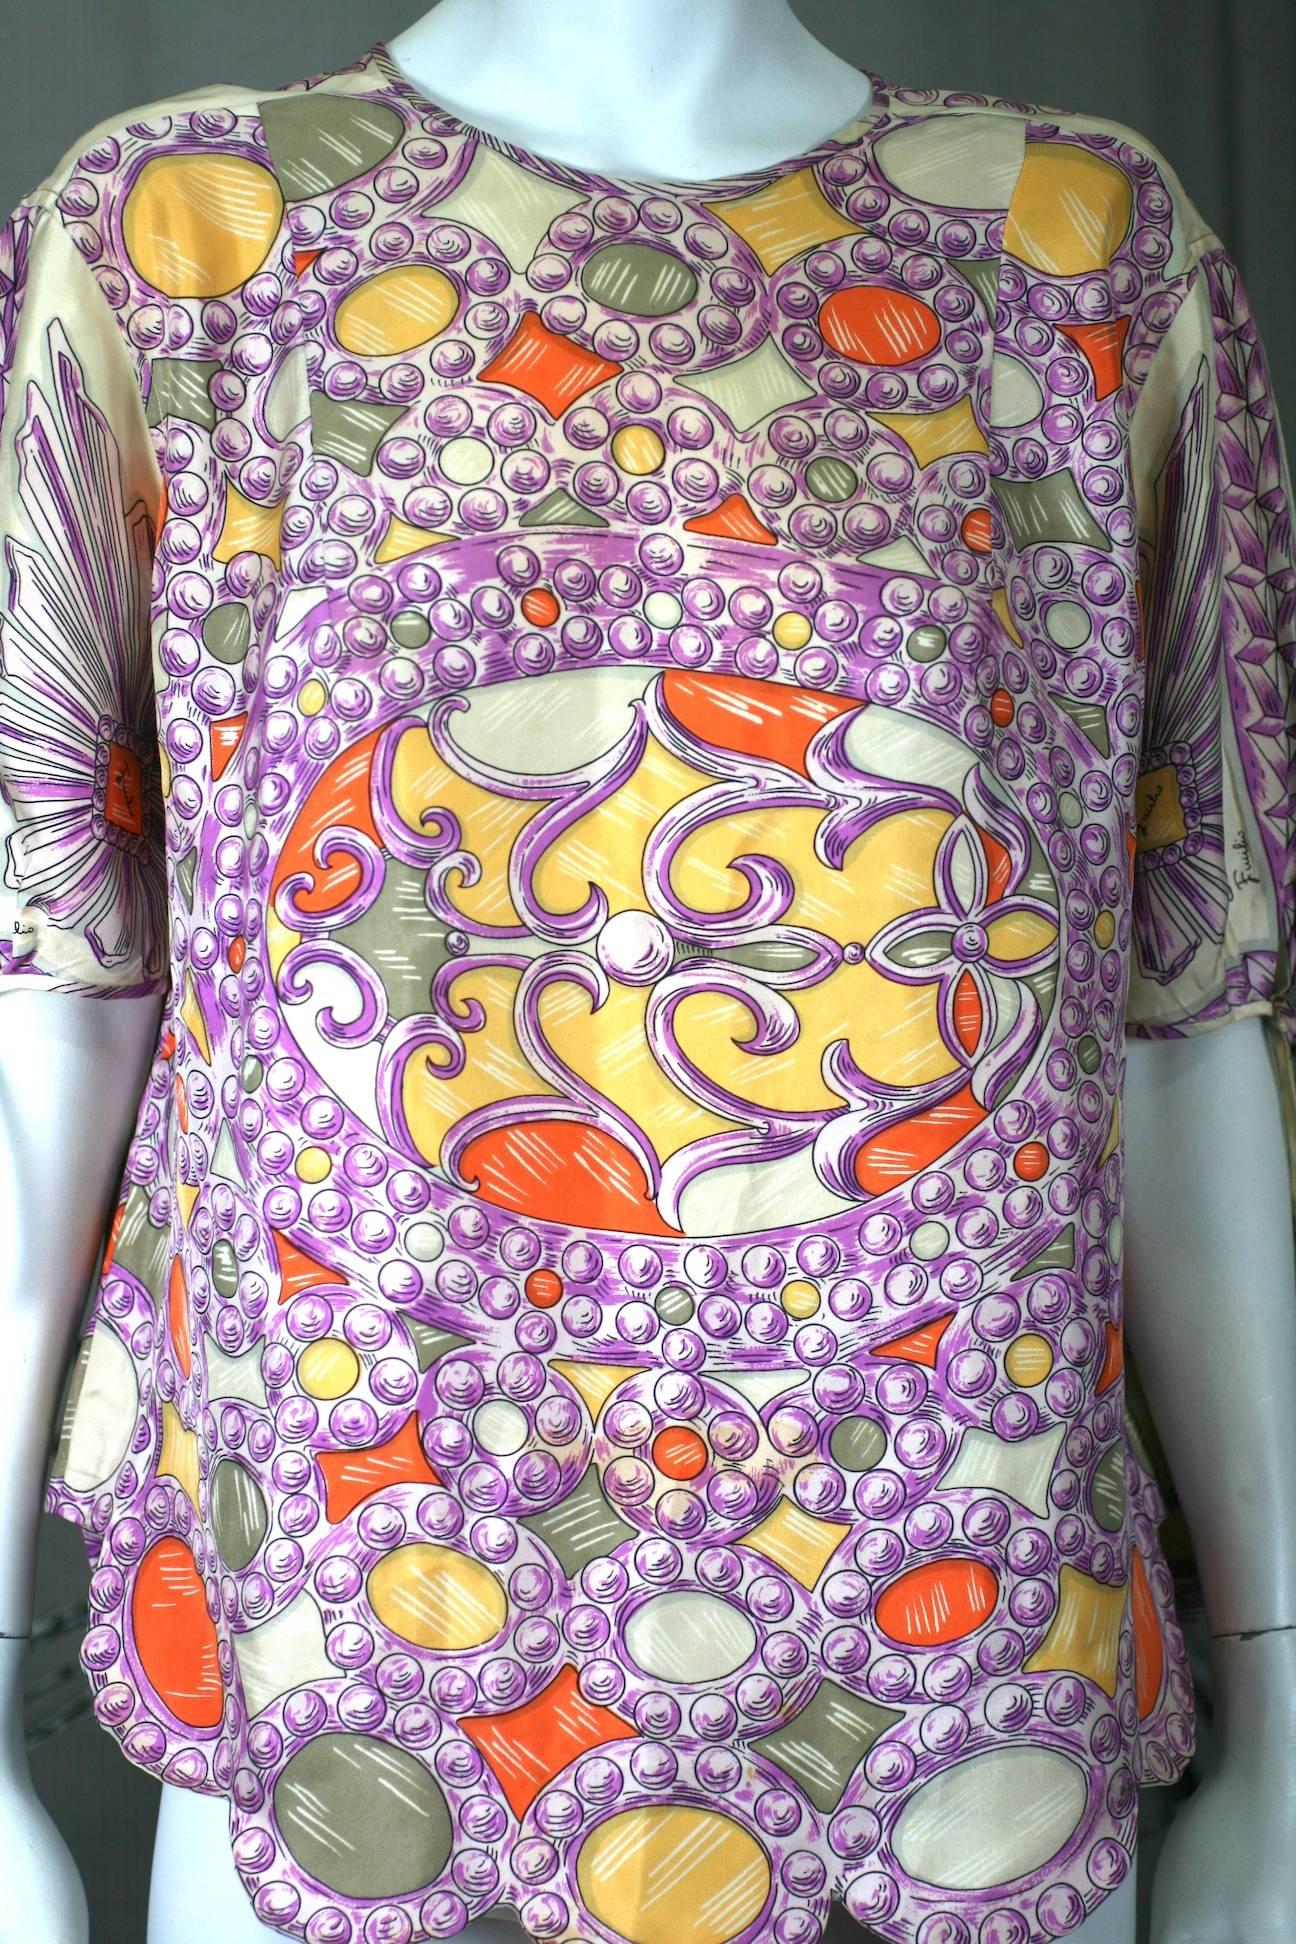 Emilio Pucci Jewel Print Top of silk twill printed with a design of intarsia stones or jewels in purple, orange and yellow. Short sleeves have bias piped trim to tie in a bow as does neckline.
Hem is scalloped with design of pattern. 1960's Italy.